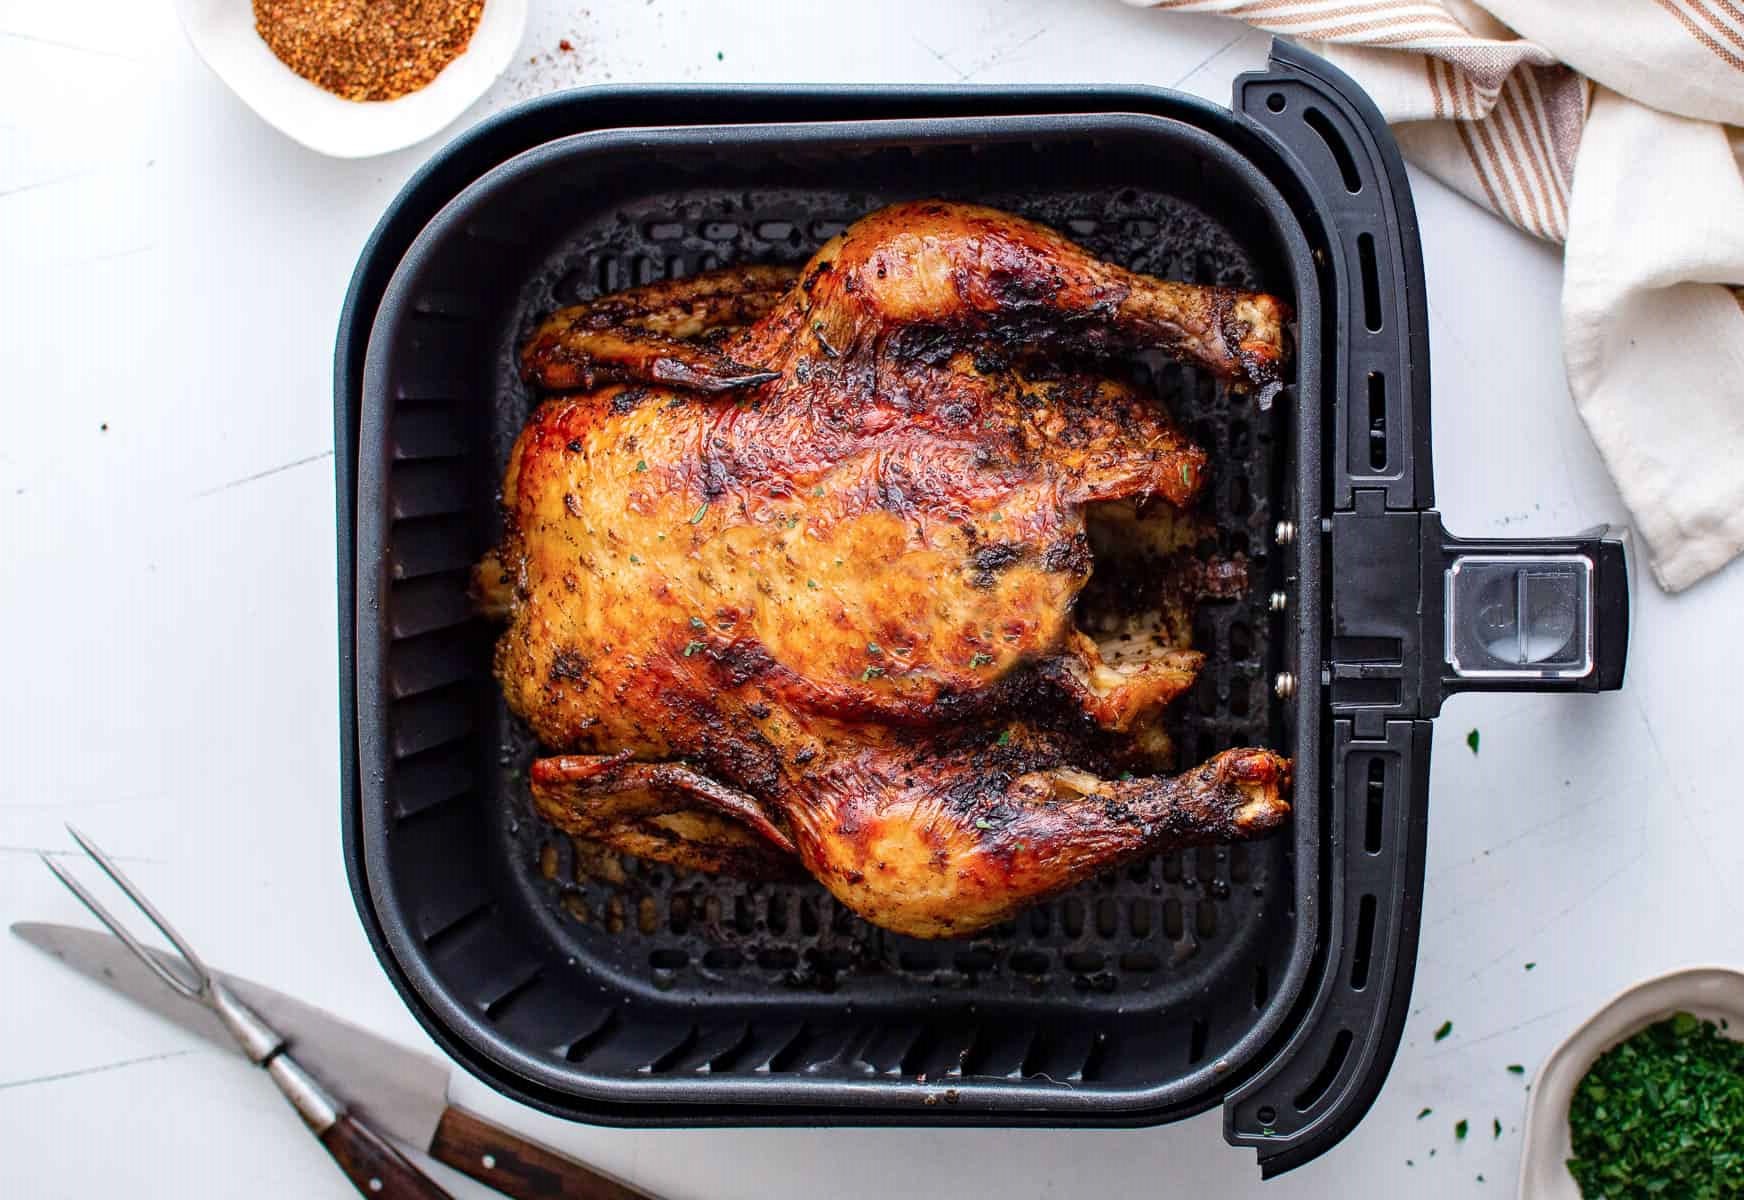 https://storables.com/wp-content/uploads/2023/07/how-to-reheat-rotisserie-chicken-in-air-fryer-1689719548.jpg